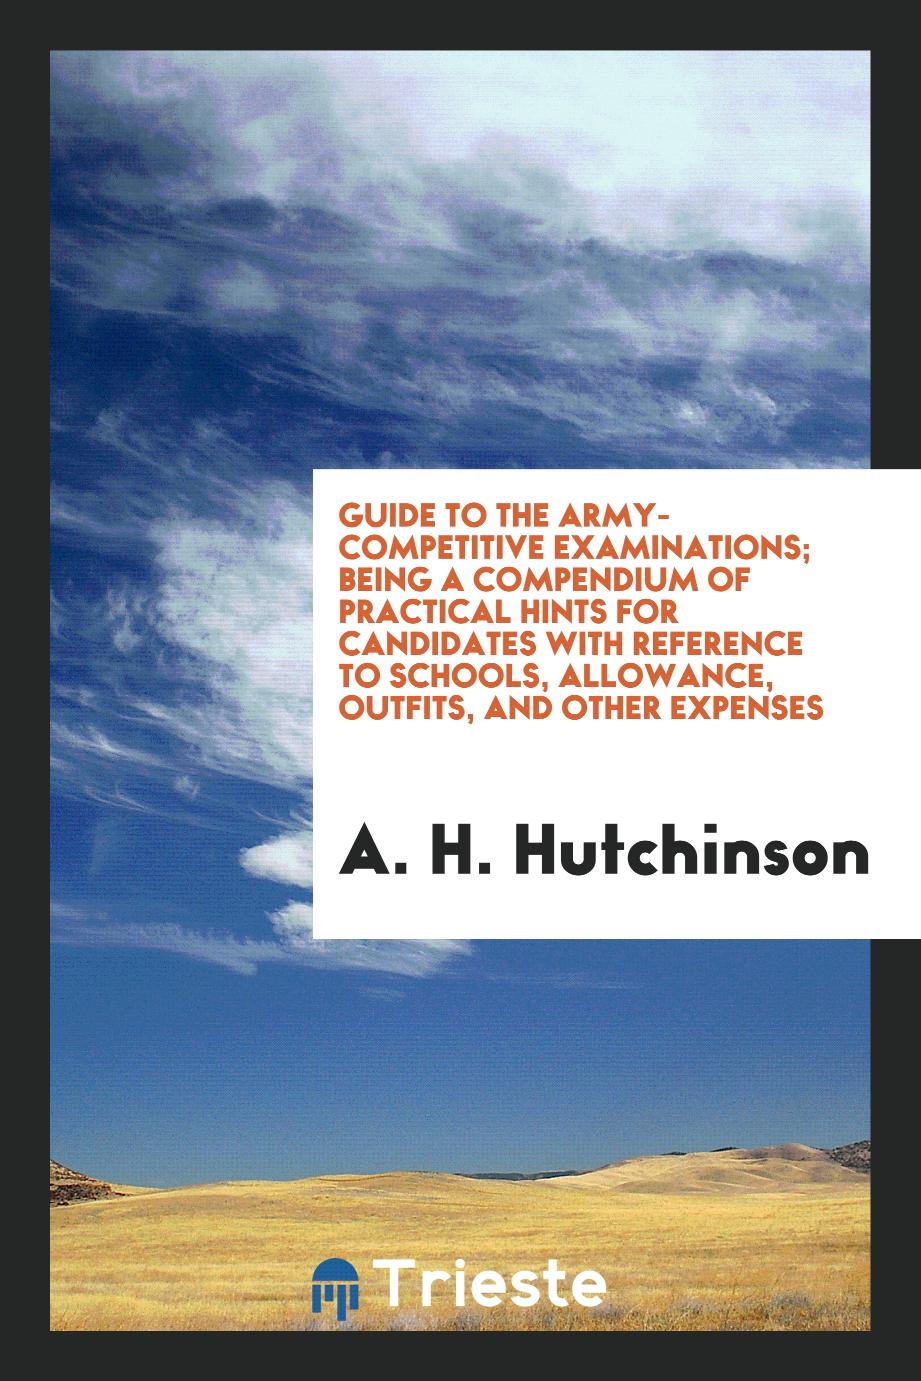 Guide to the Army-Competitive Examinations; Being a Compendium of Practical Hints for Candidates with Reference to Schools, Allowance, Outfits, and Other Expenses